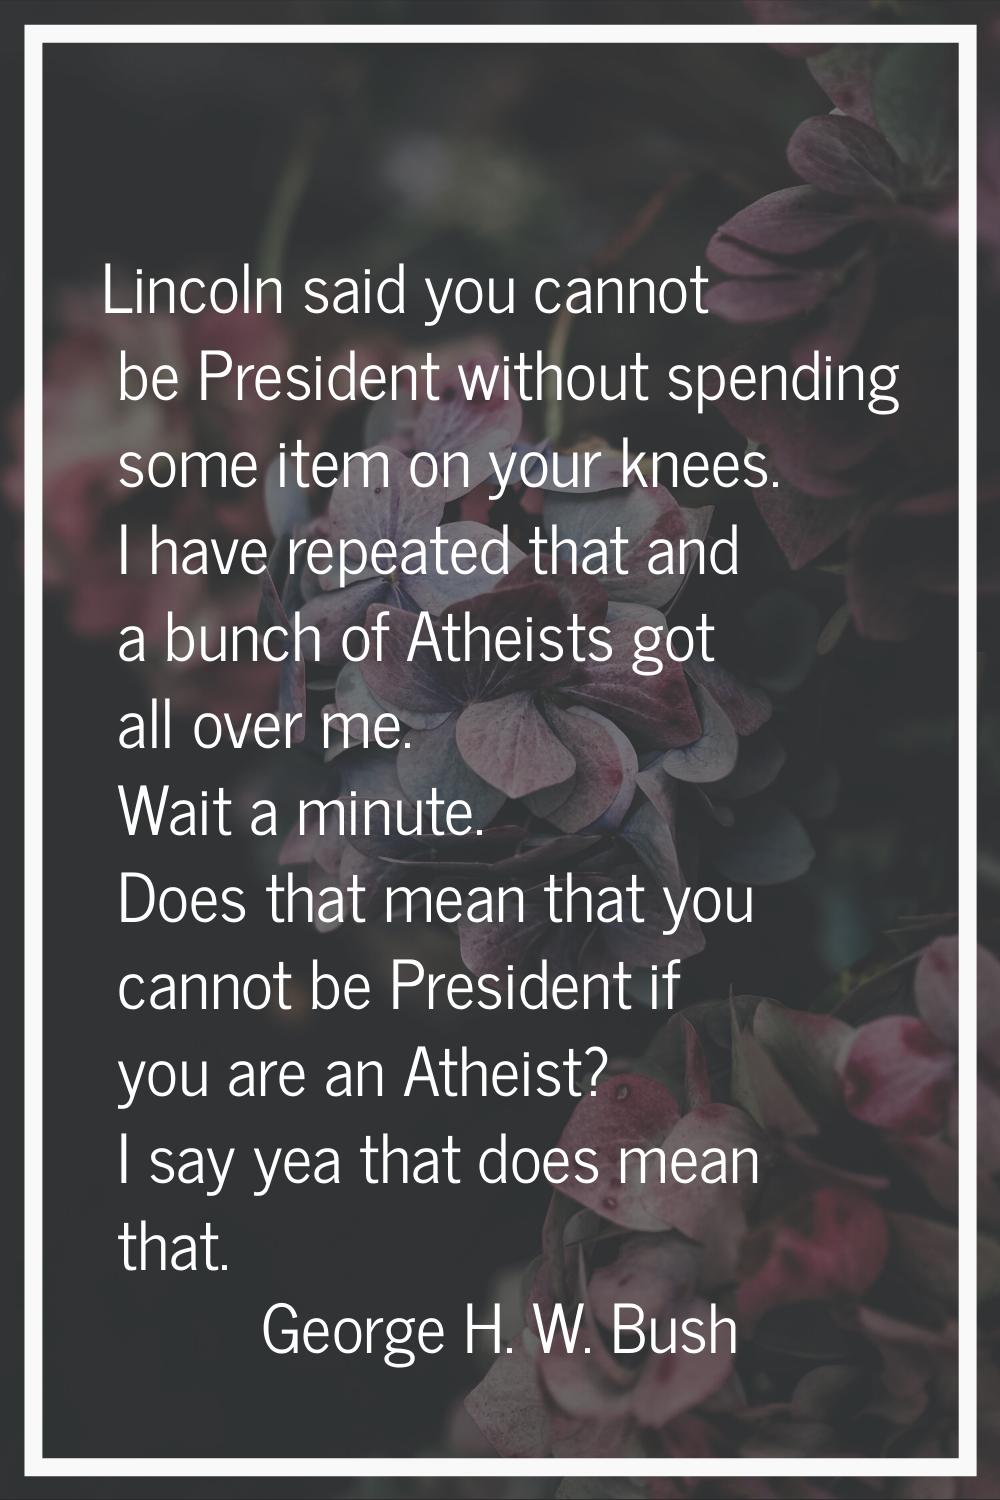 Lincoln said you cannot be President without spending some item on your knees. I have repeated that